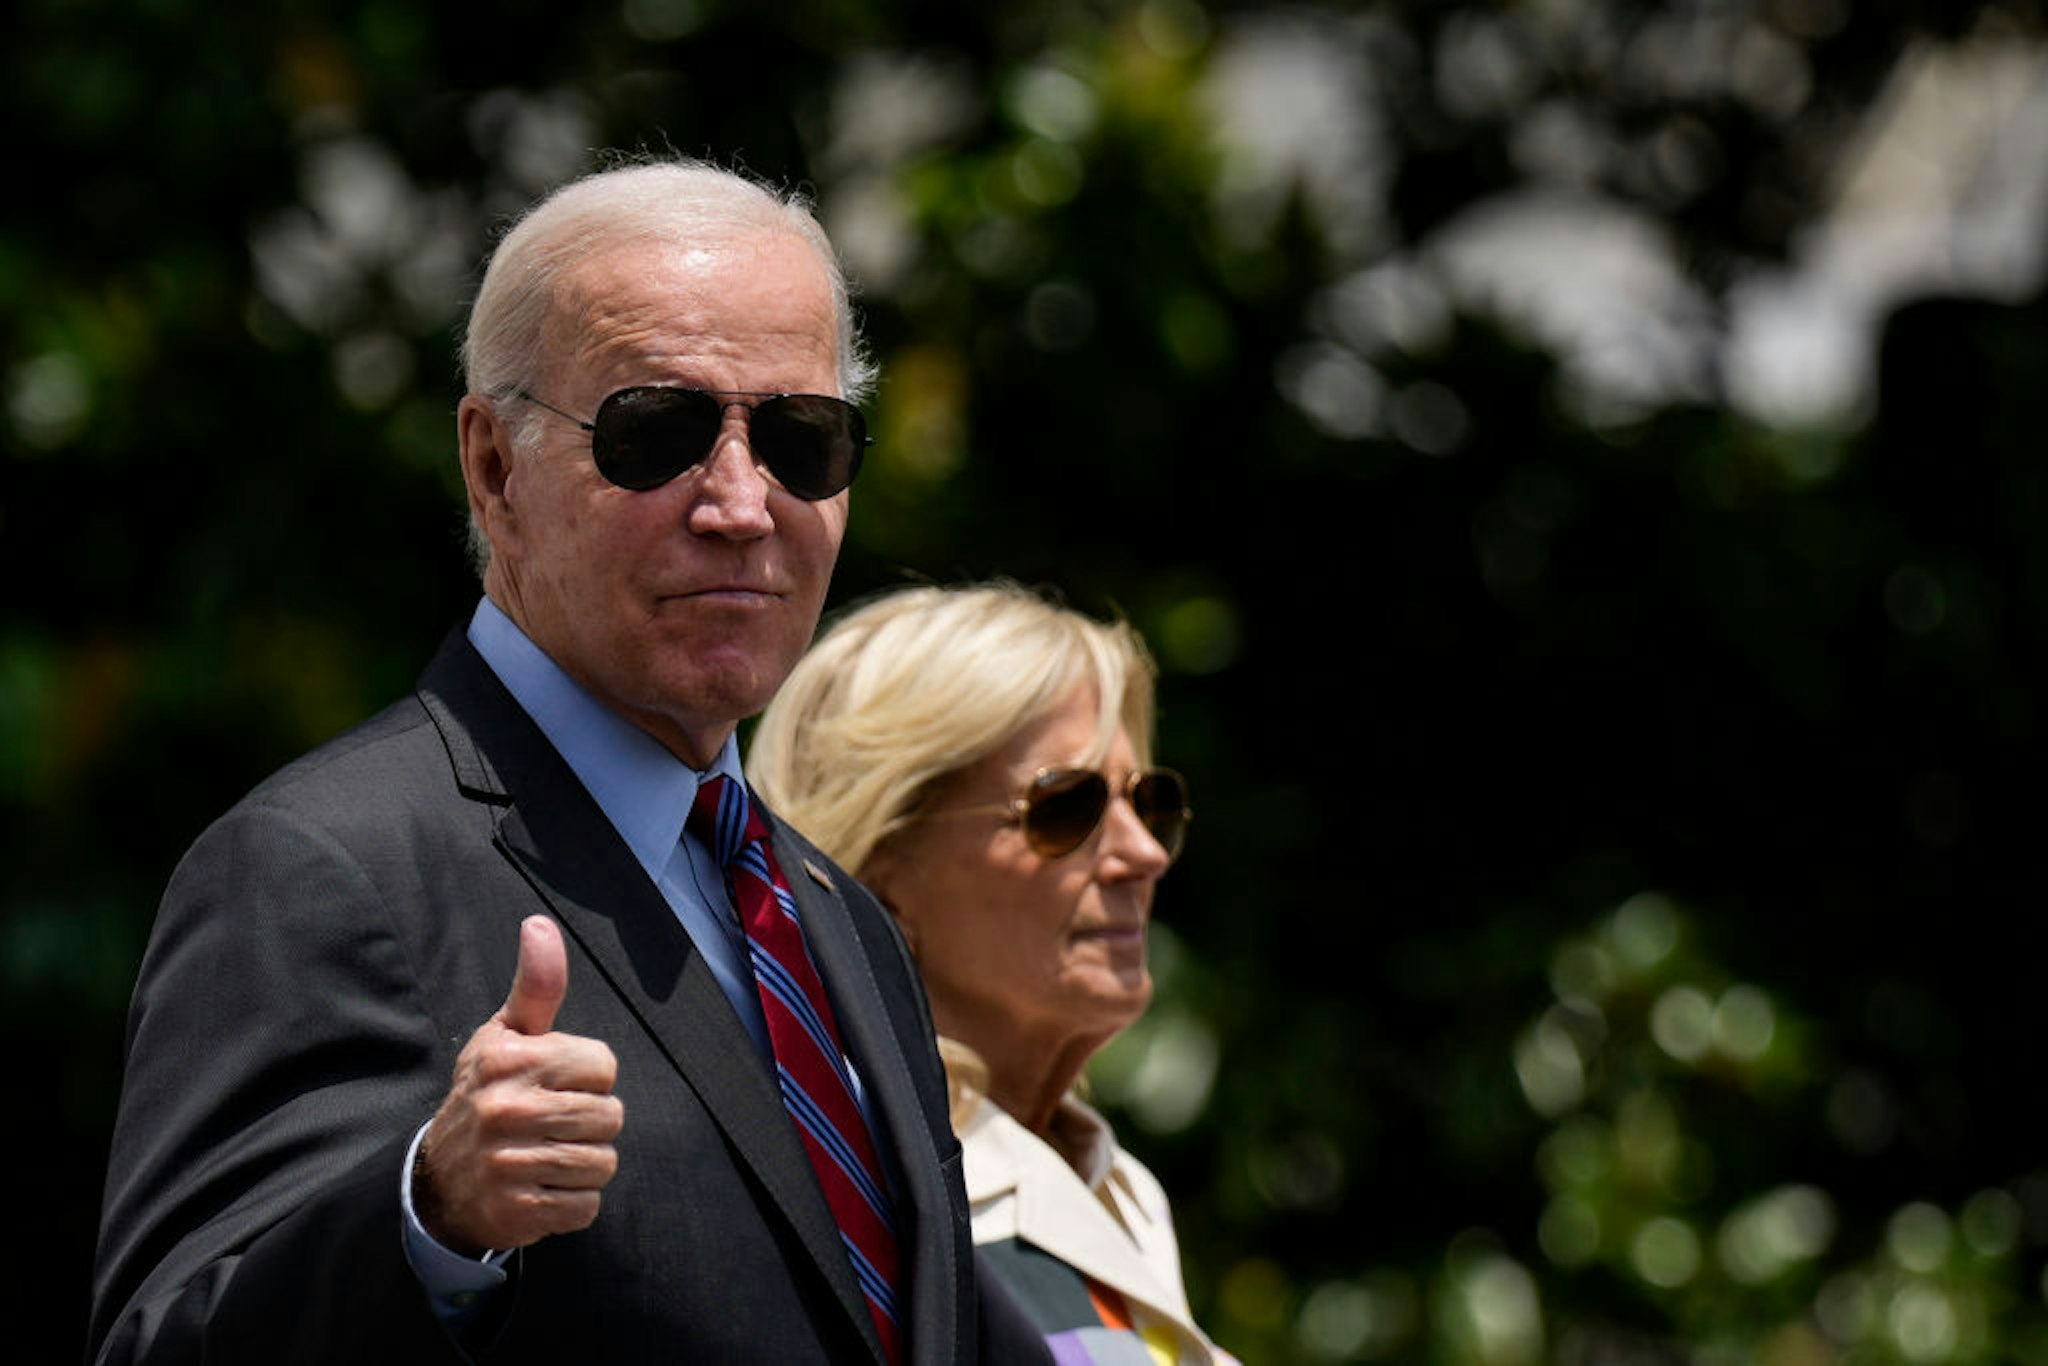 WASHINGTON, DC - JULY 14: U.S. President Joe Biden gives a thumbs up as he walks with first lady Jill Biden to Marine One on the South Lawn of the White House July 14, 2023 in Washington, DC. Biden is spending the weekend at Camp David in Maryland. (Photo by Drew Angerer/Getty Images)